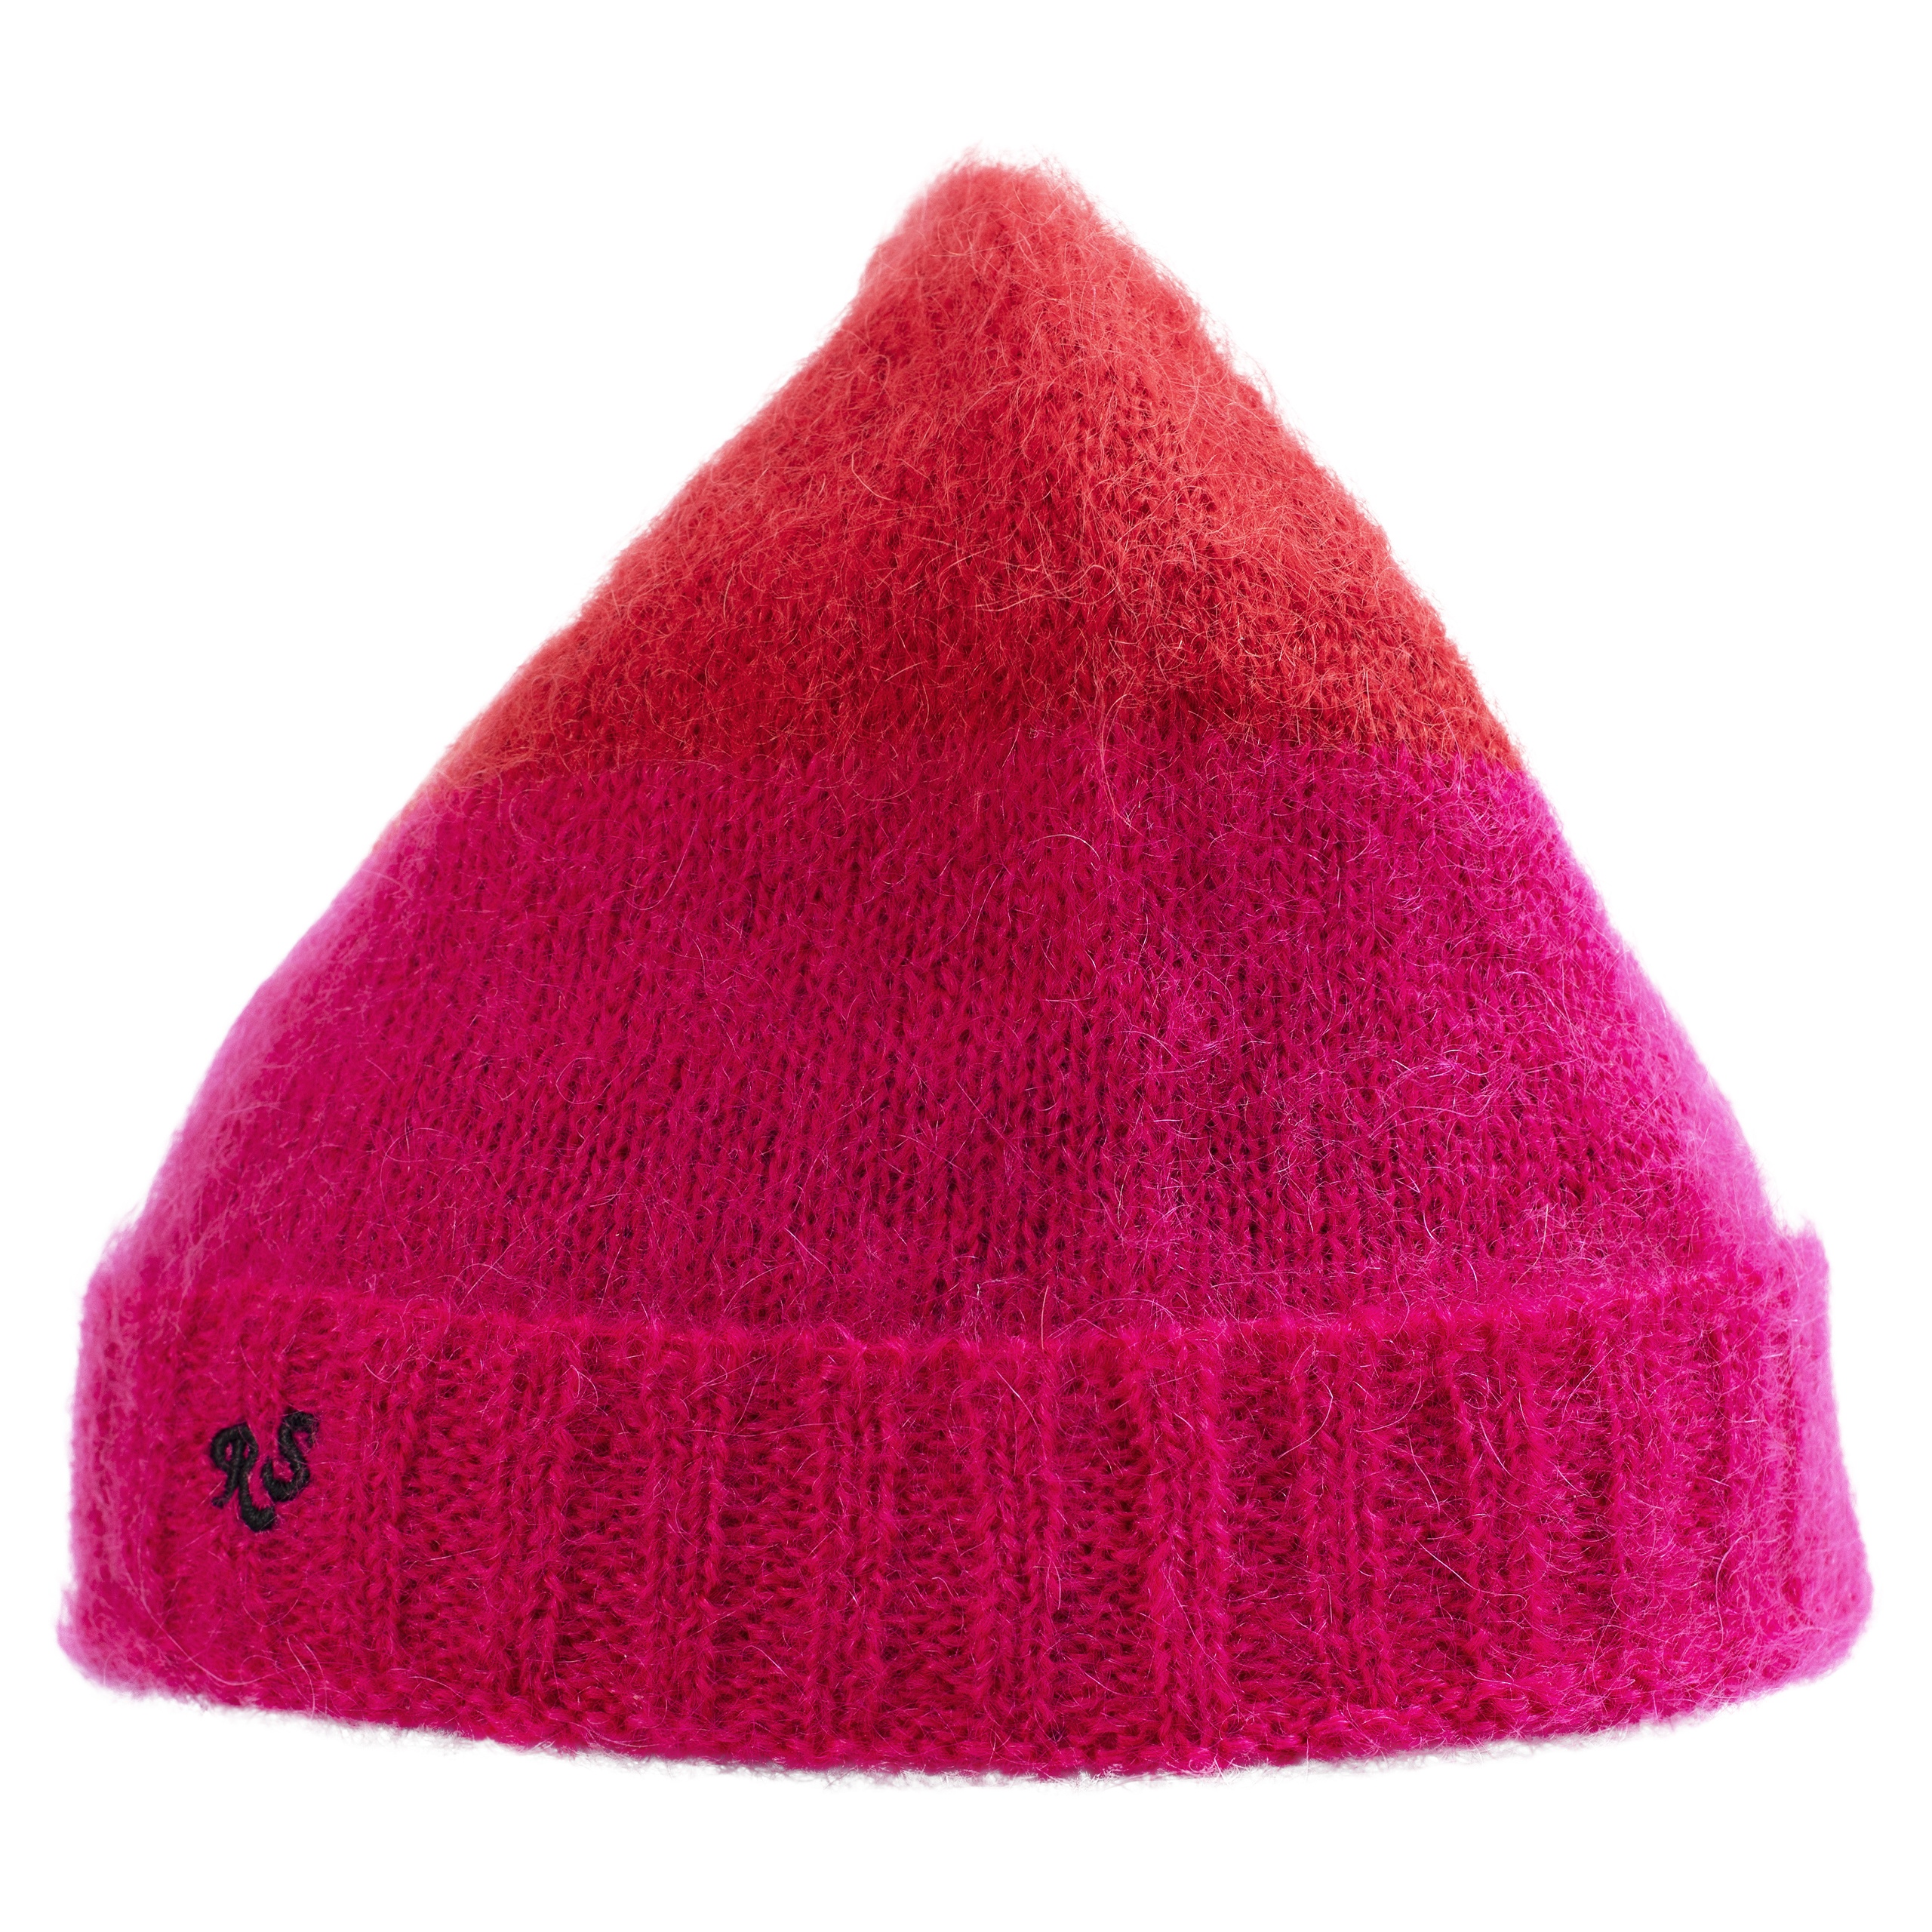 TWO-TONE RS KNIT BEANIE - 2